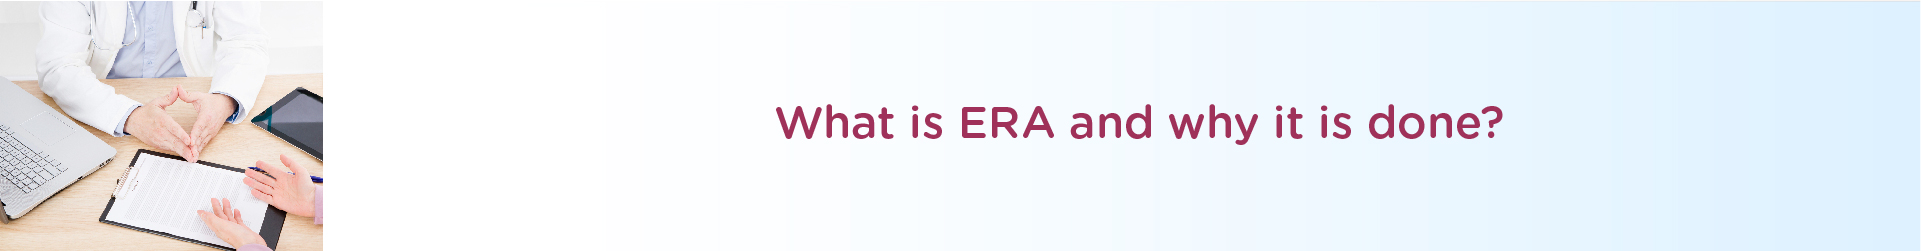 What is ERA and why it is done?